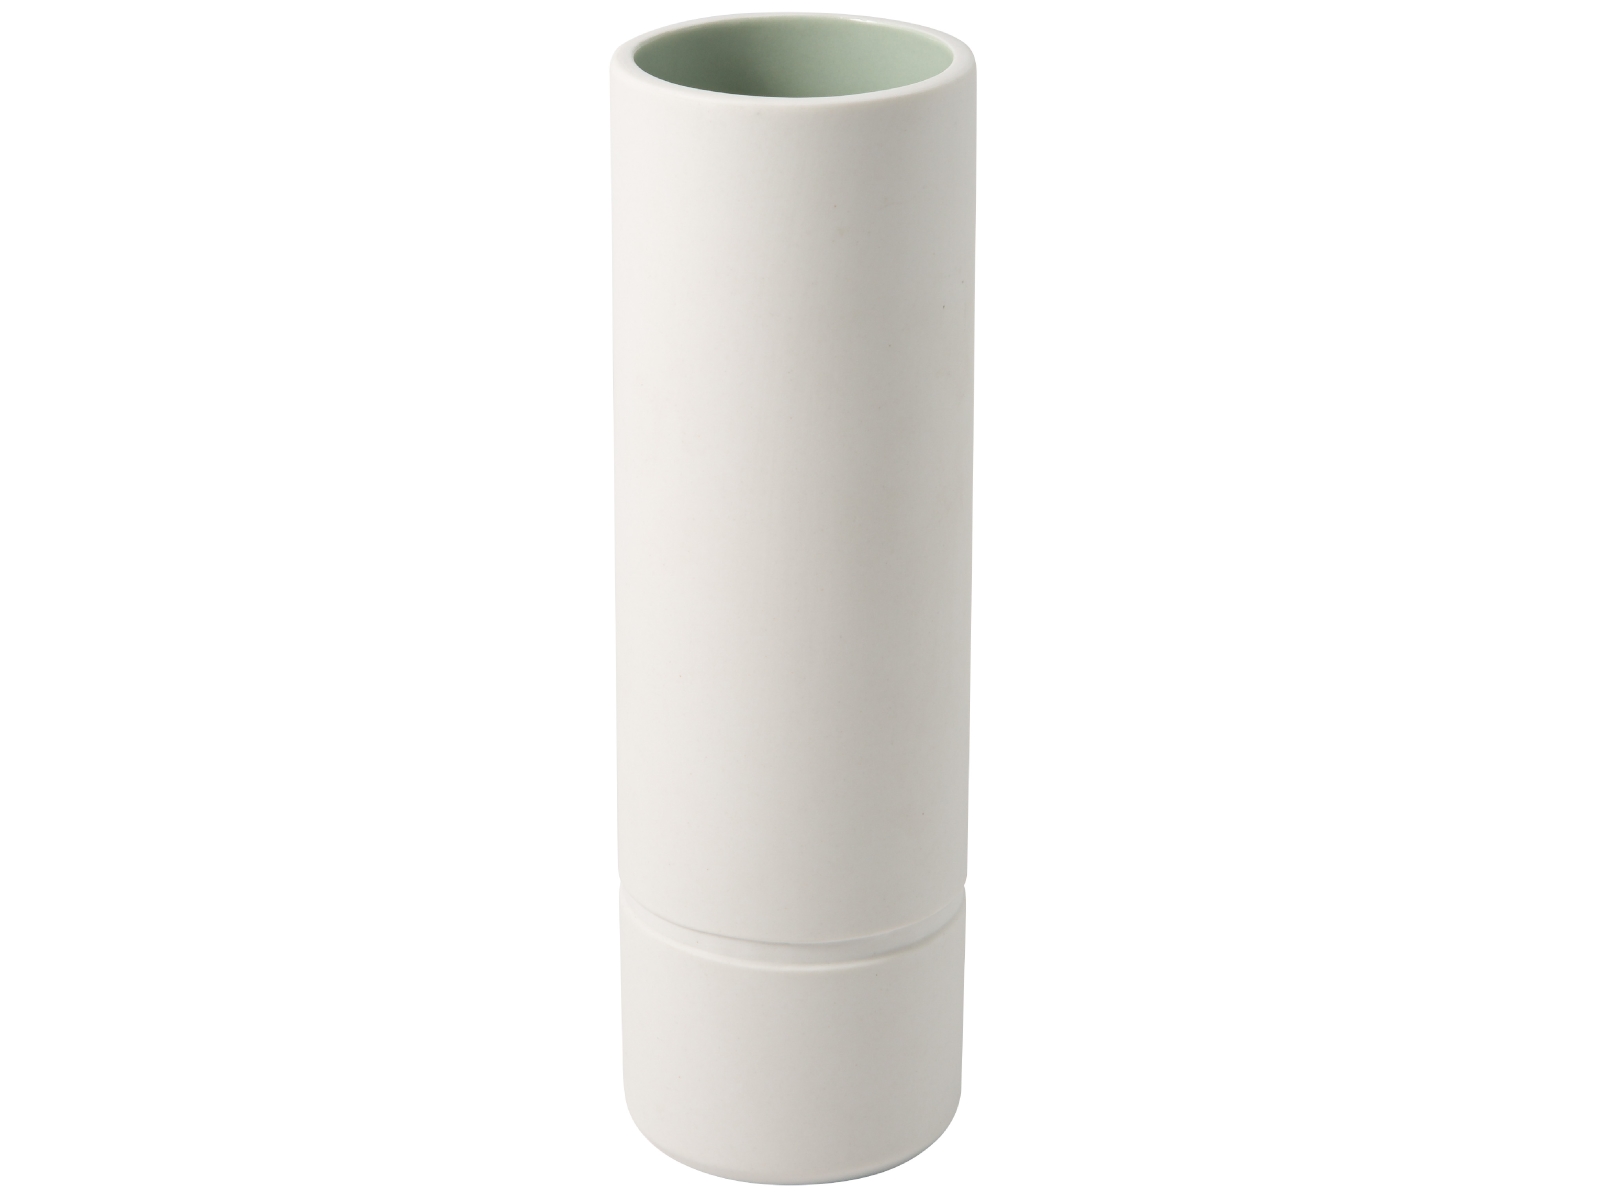 Villeroy & Boch it's my home Vase L mineral 6 x 20 cm